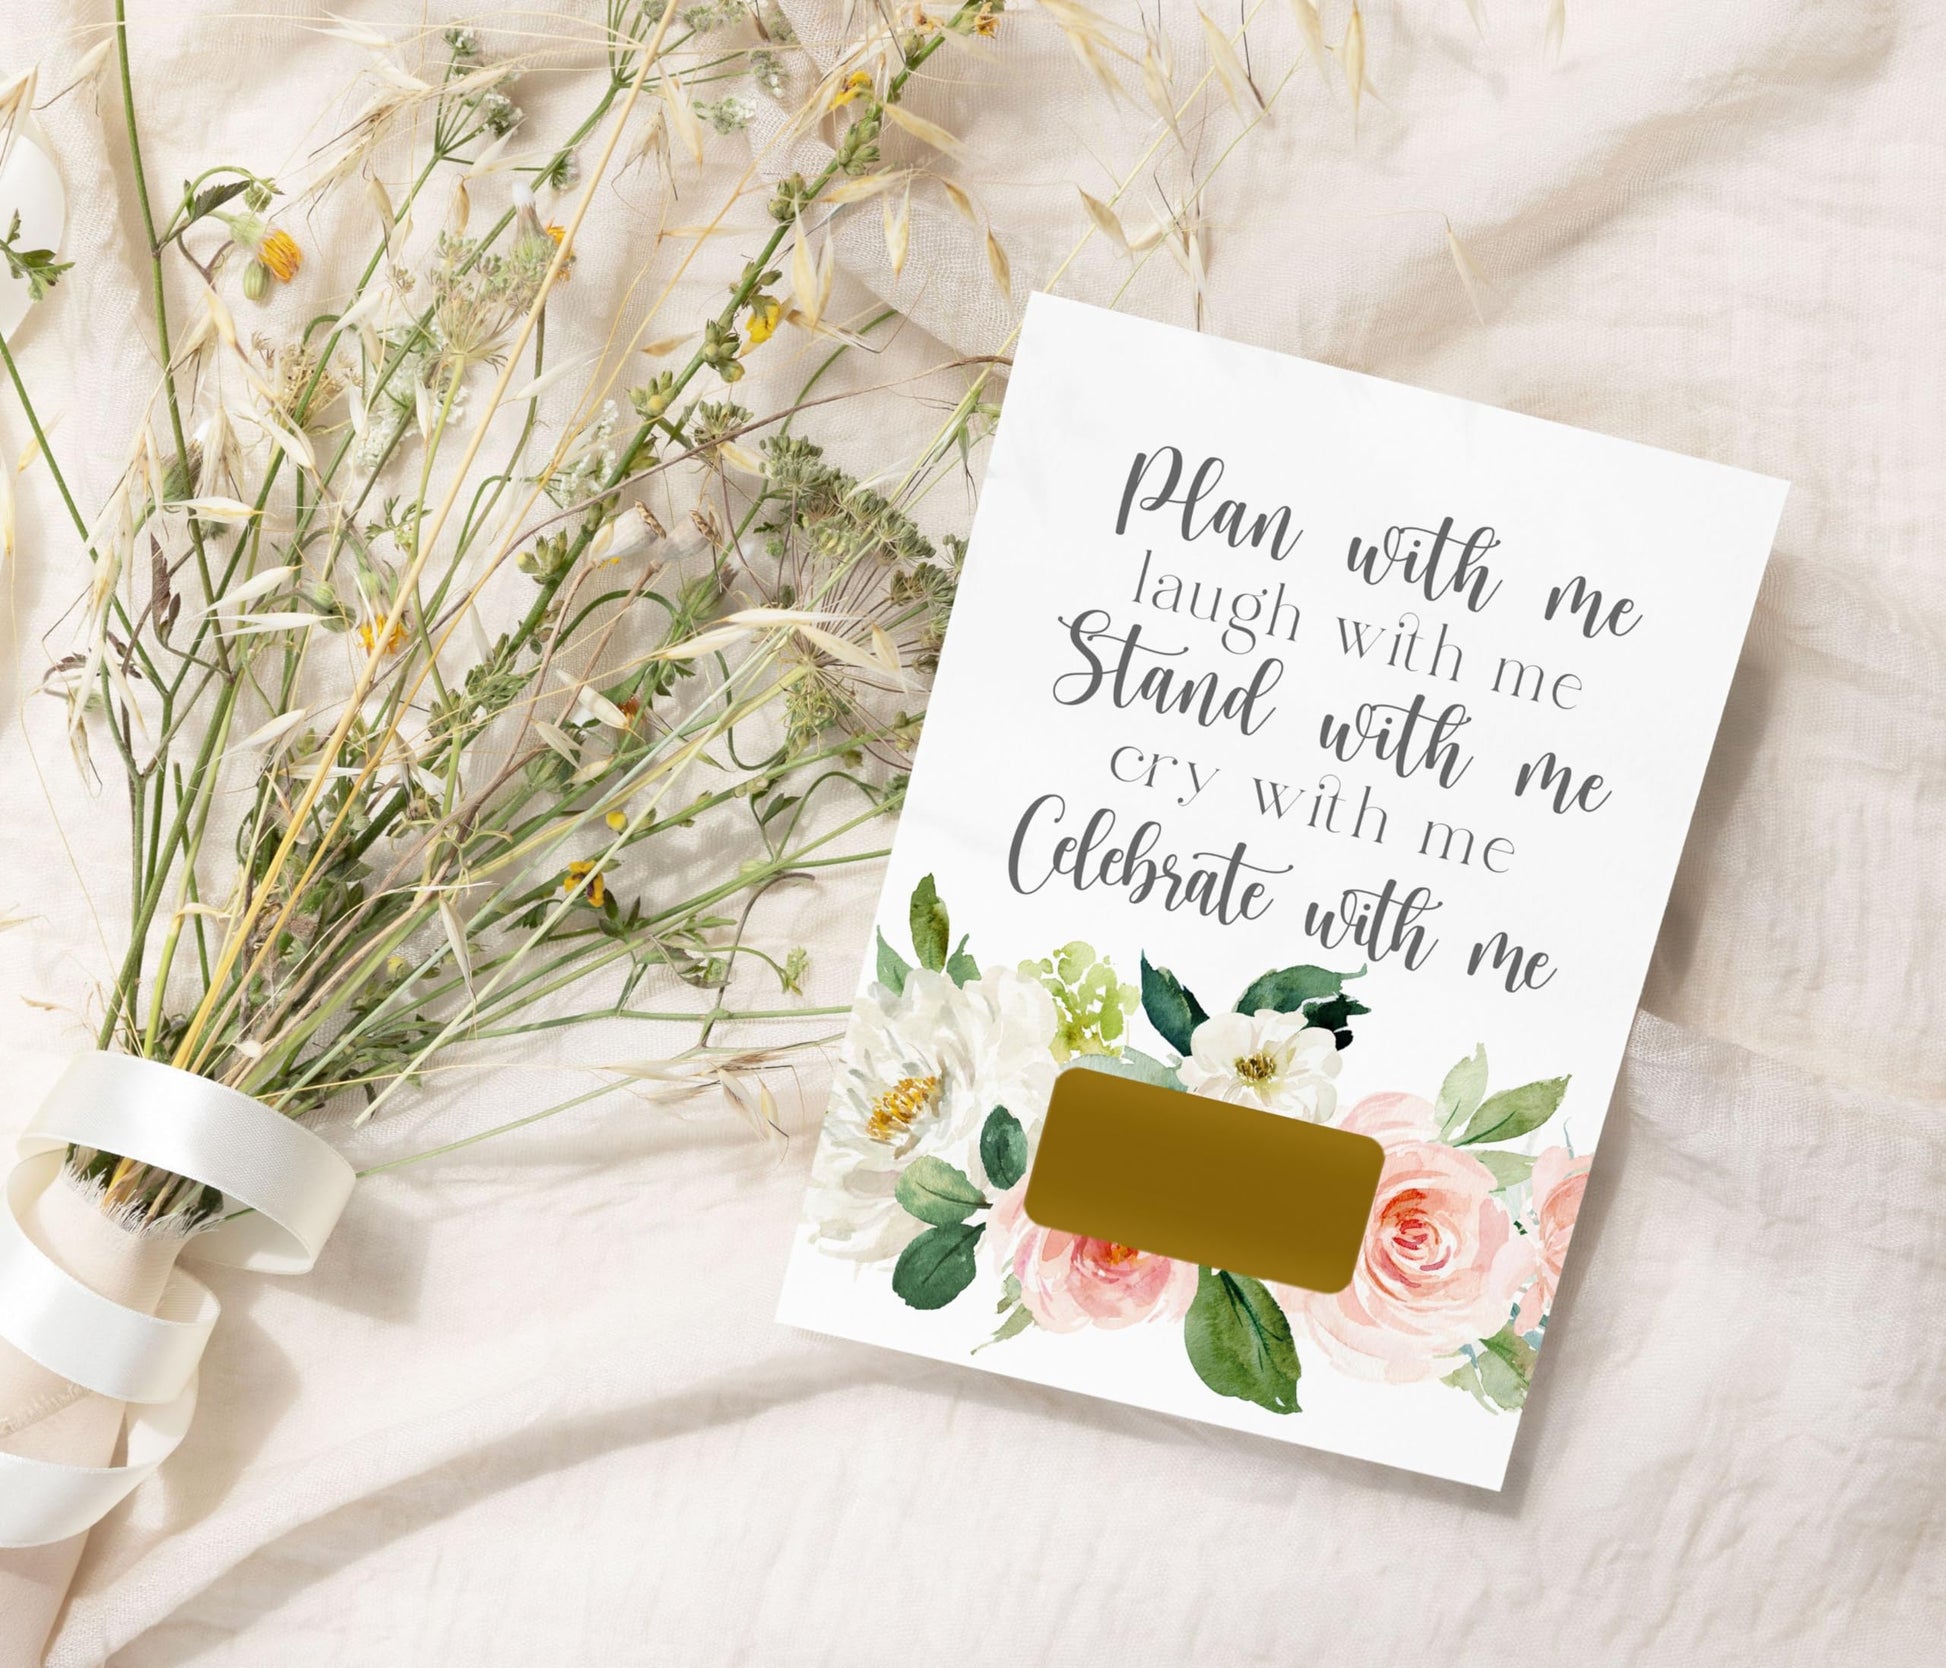 Graceful Floral Bridesmaid Cards, Bridal Party ScratchPaper Clever Party